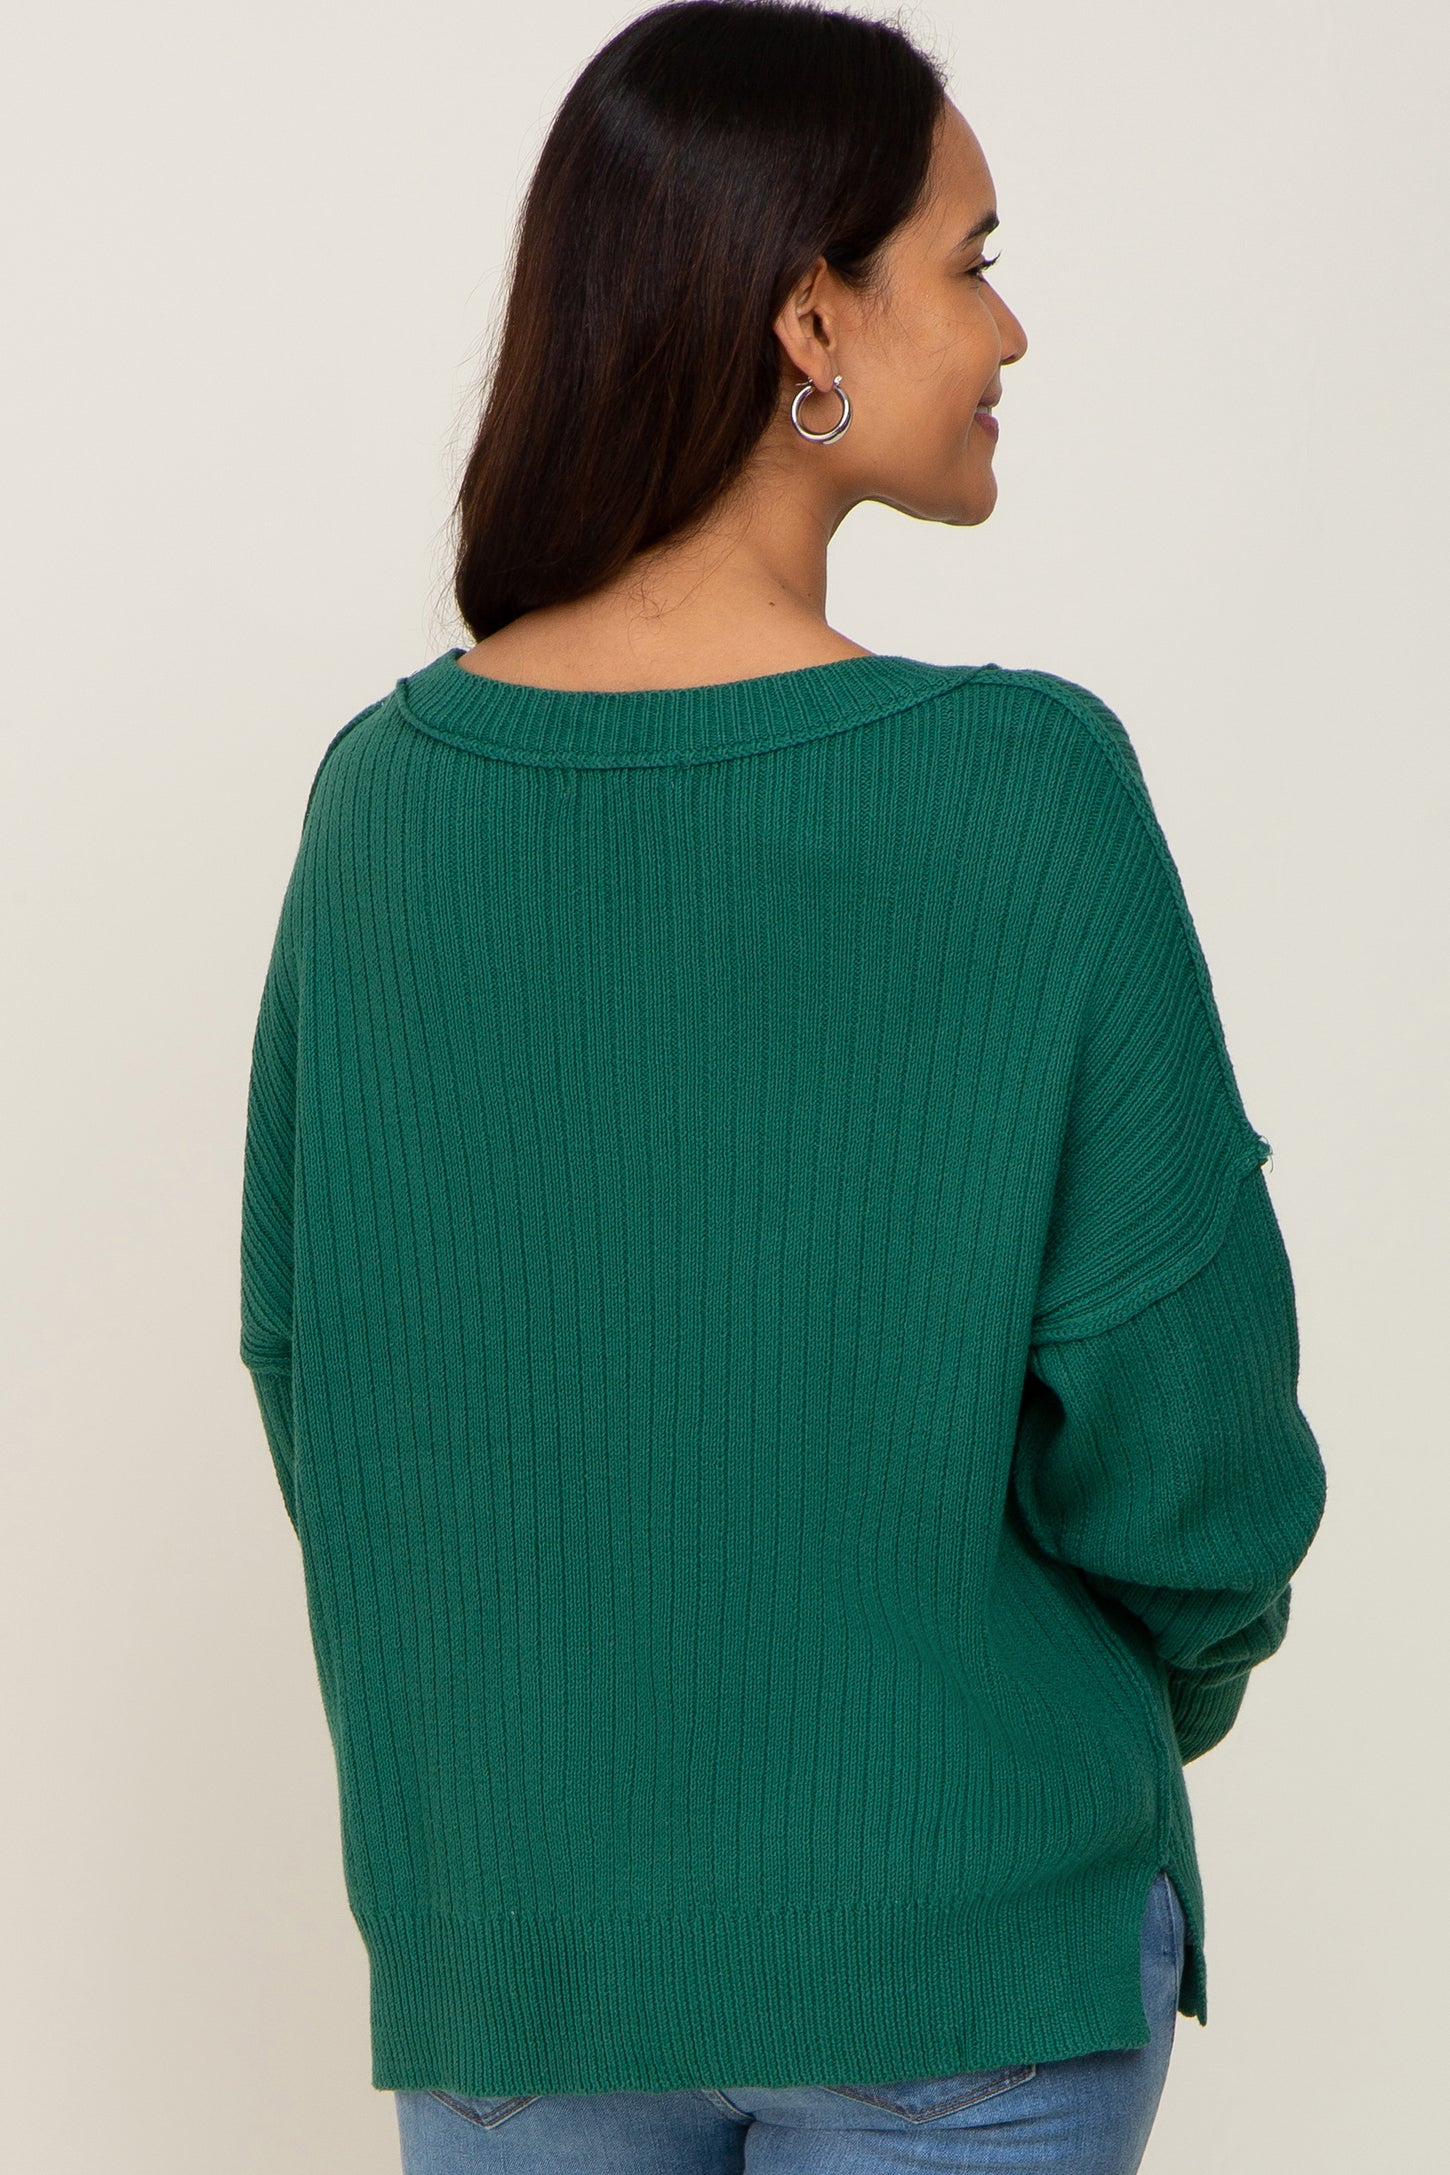 Green Ribbed Maternity Sweater